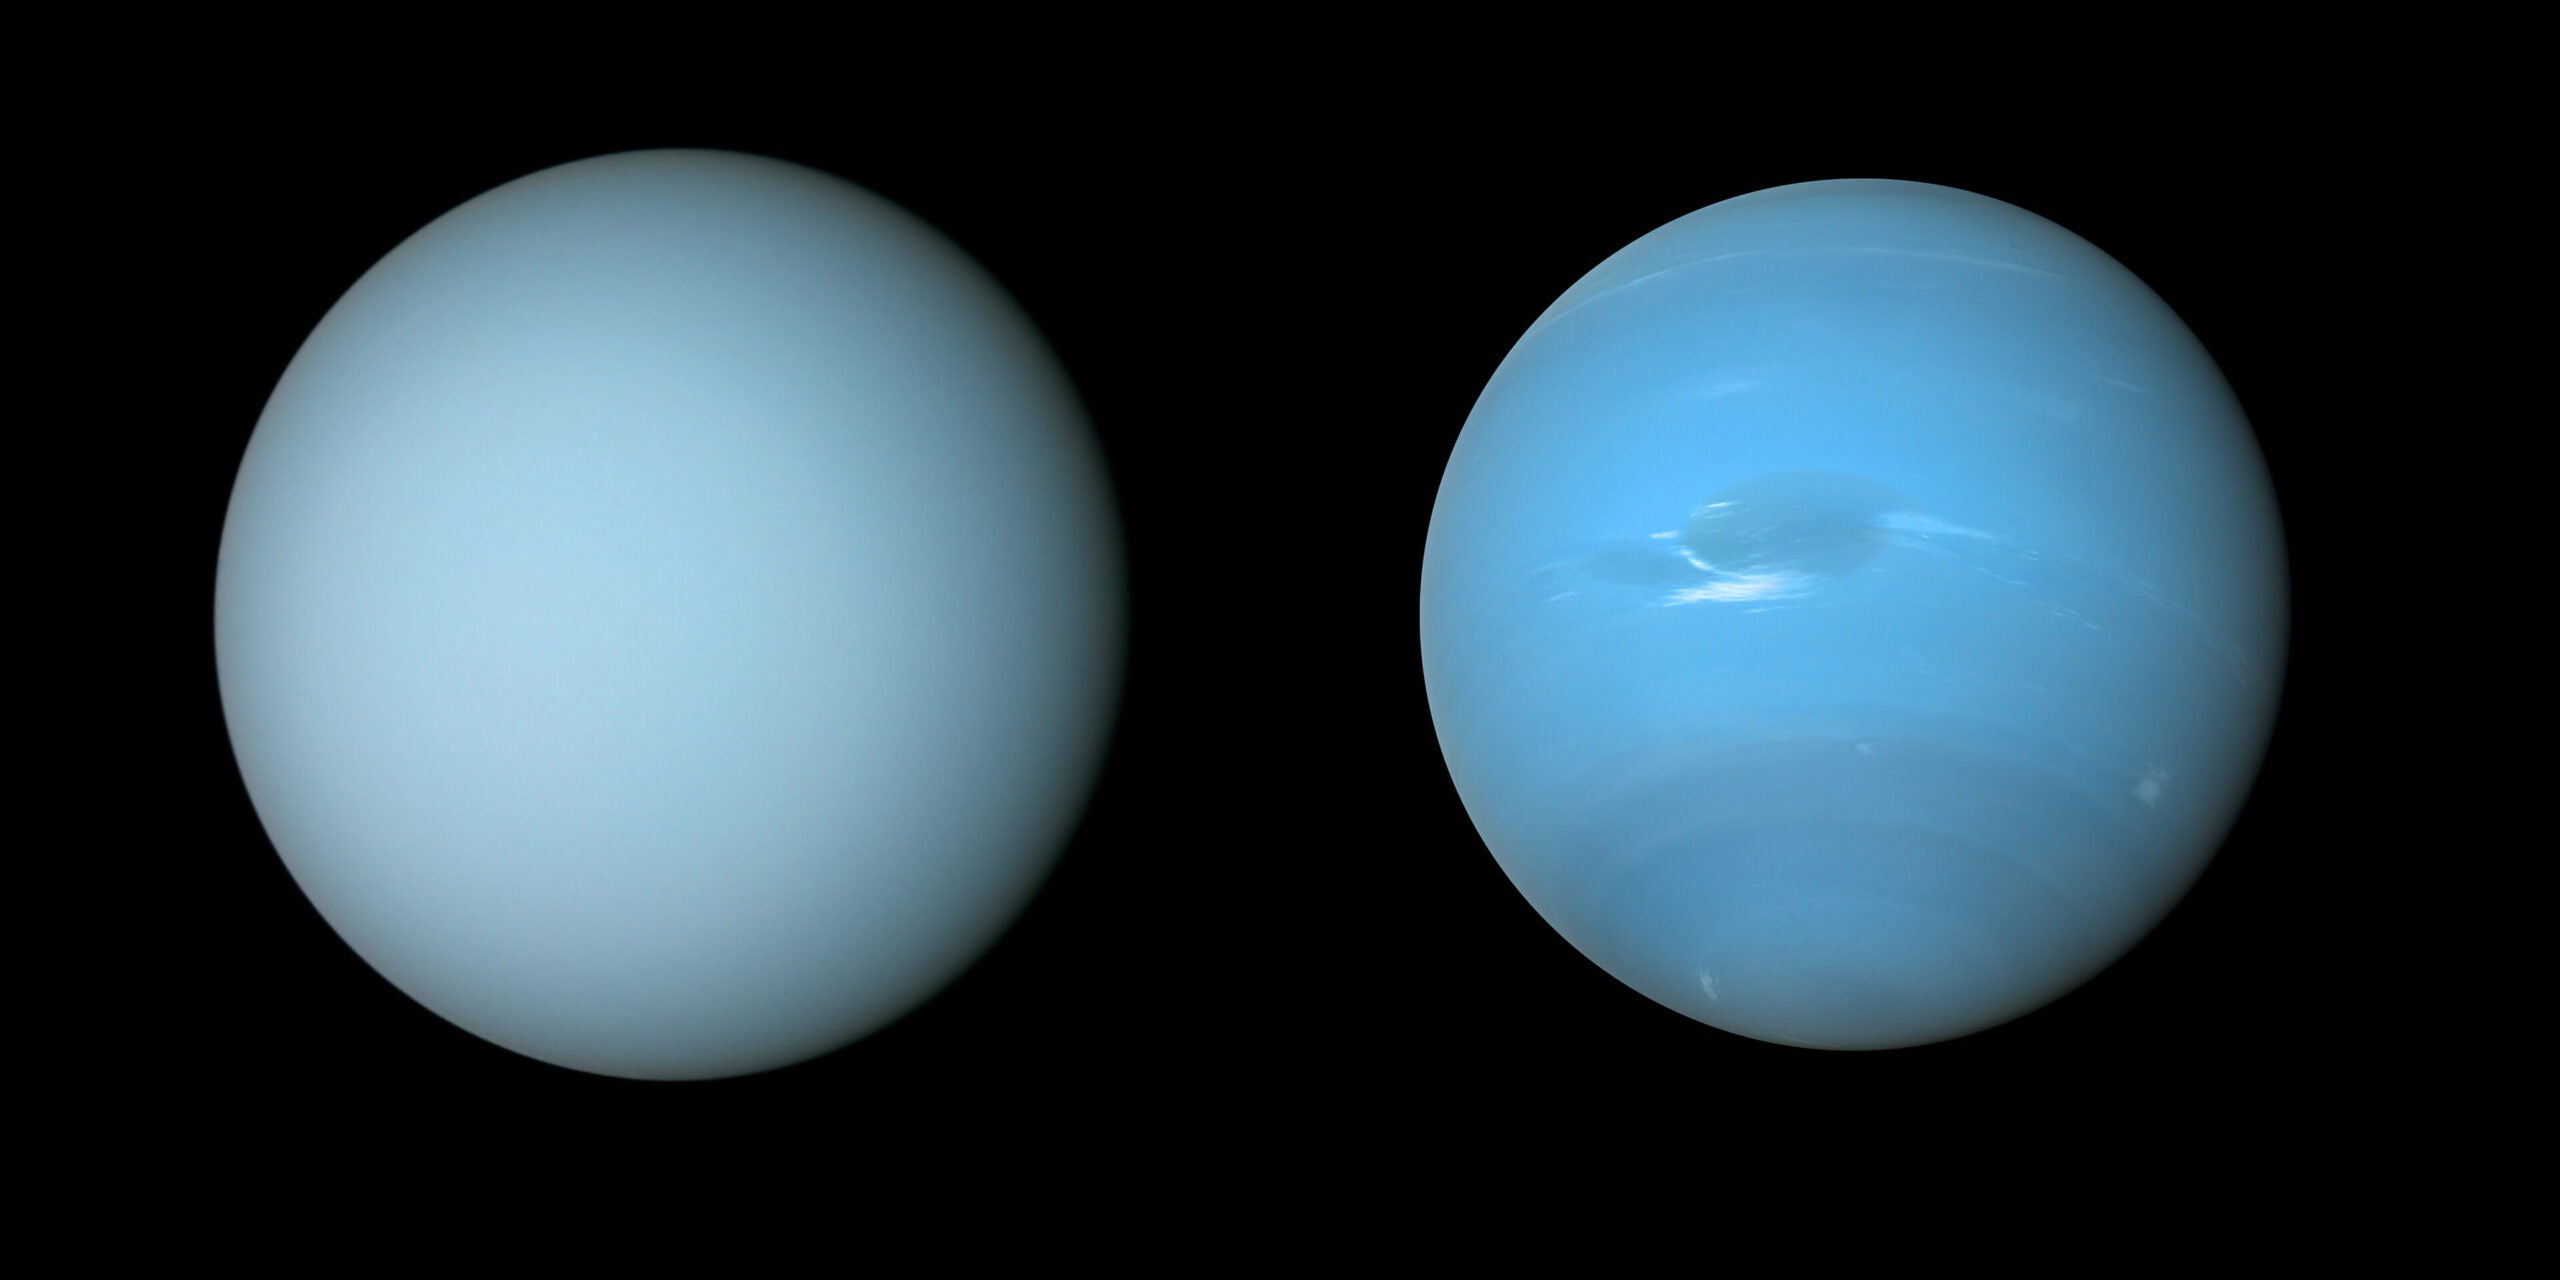 Uranus and Neptune both have the blues. But different hues. thumbnail